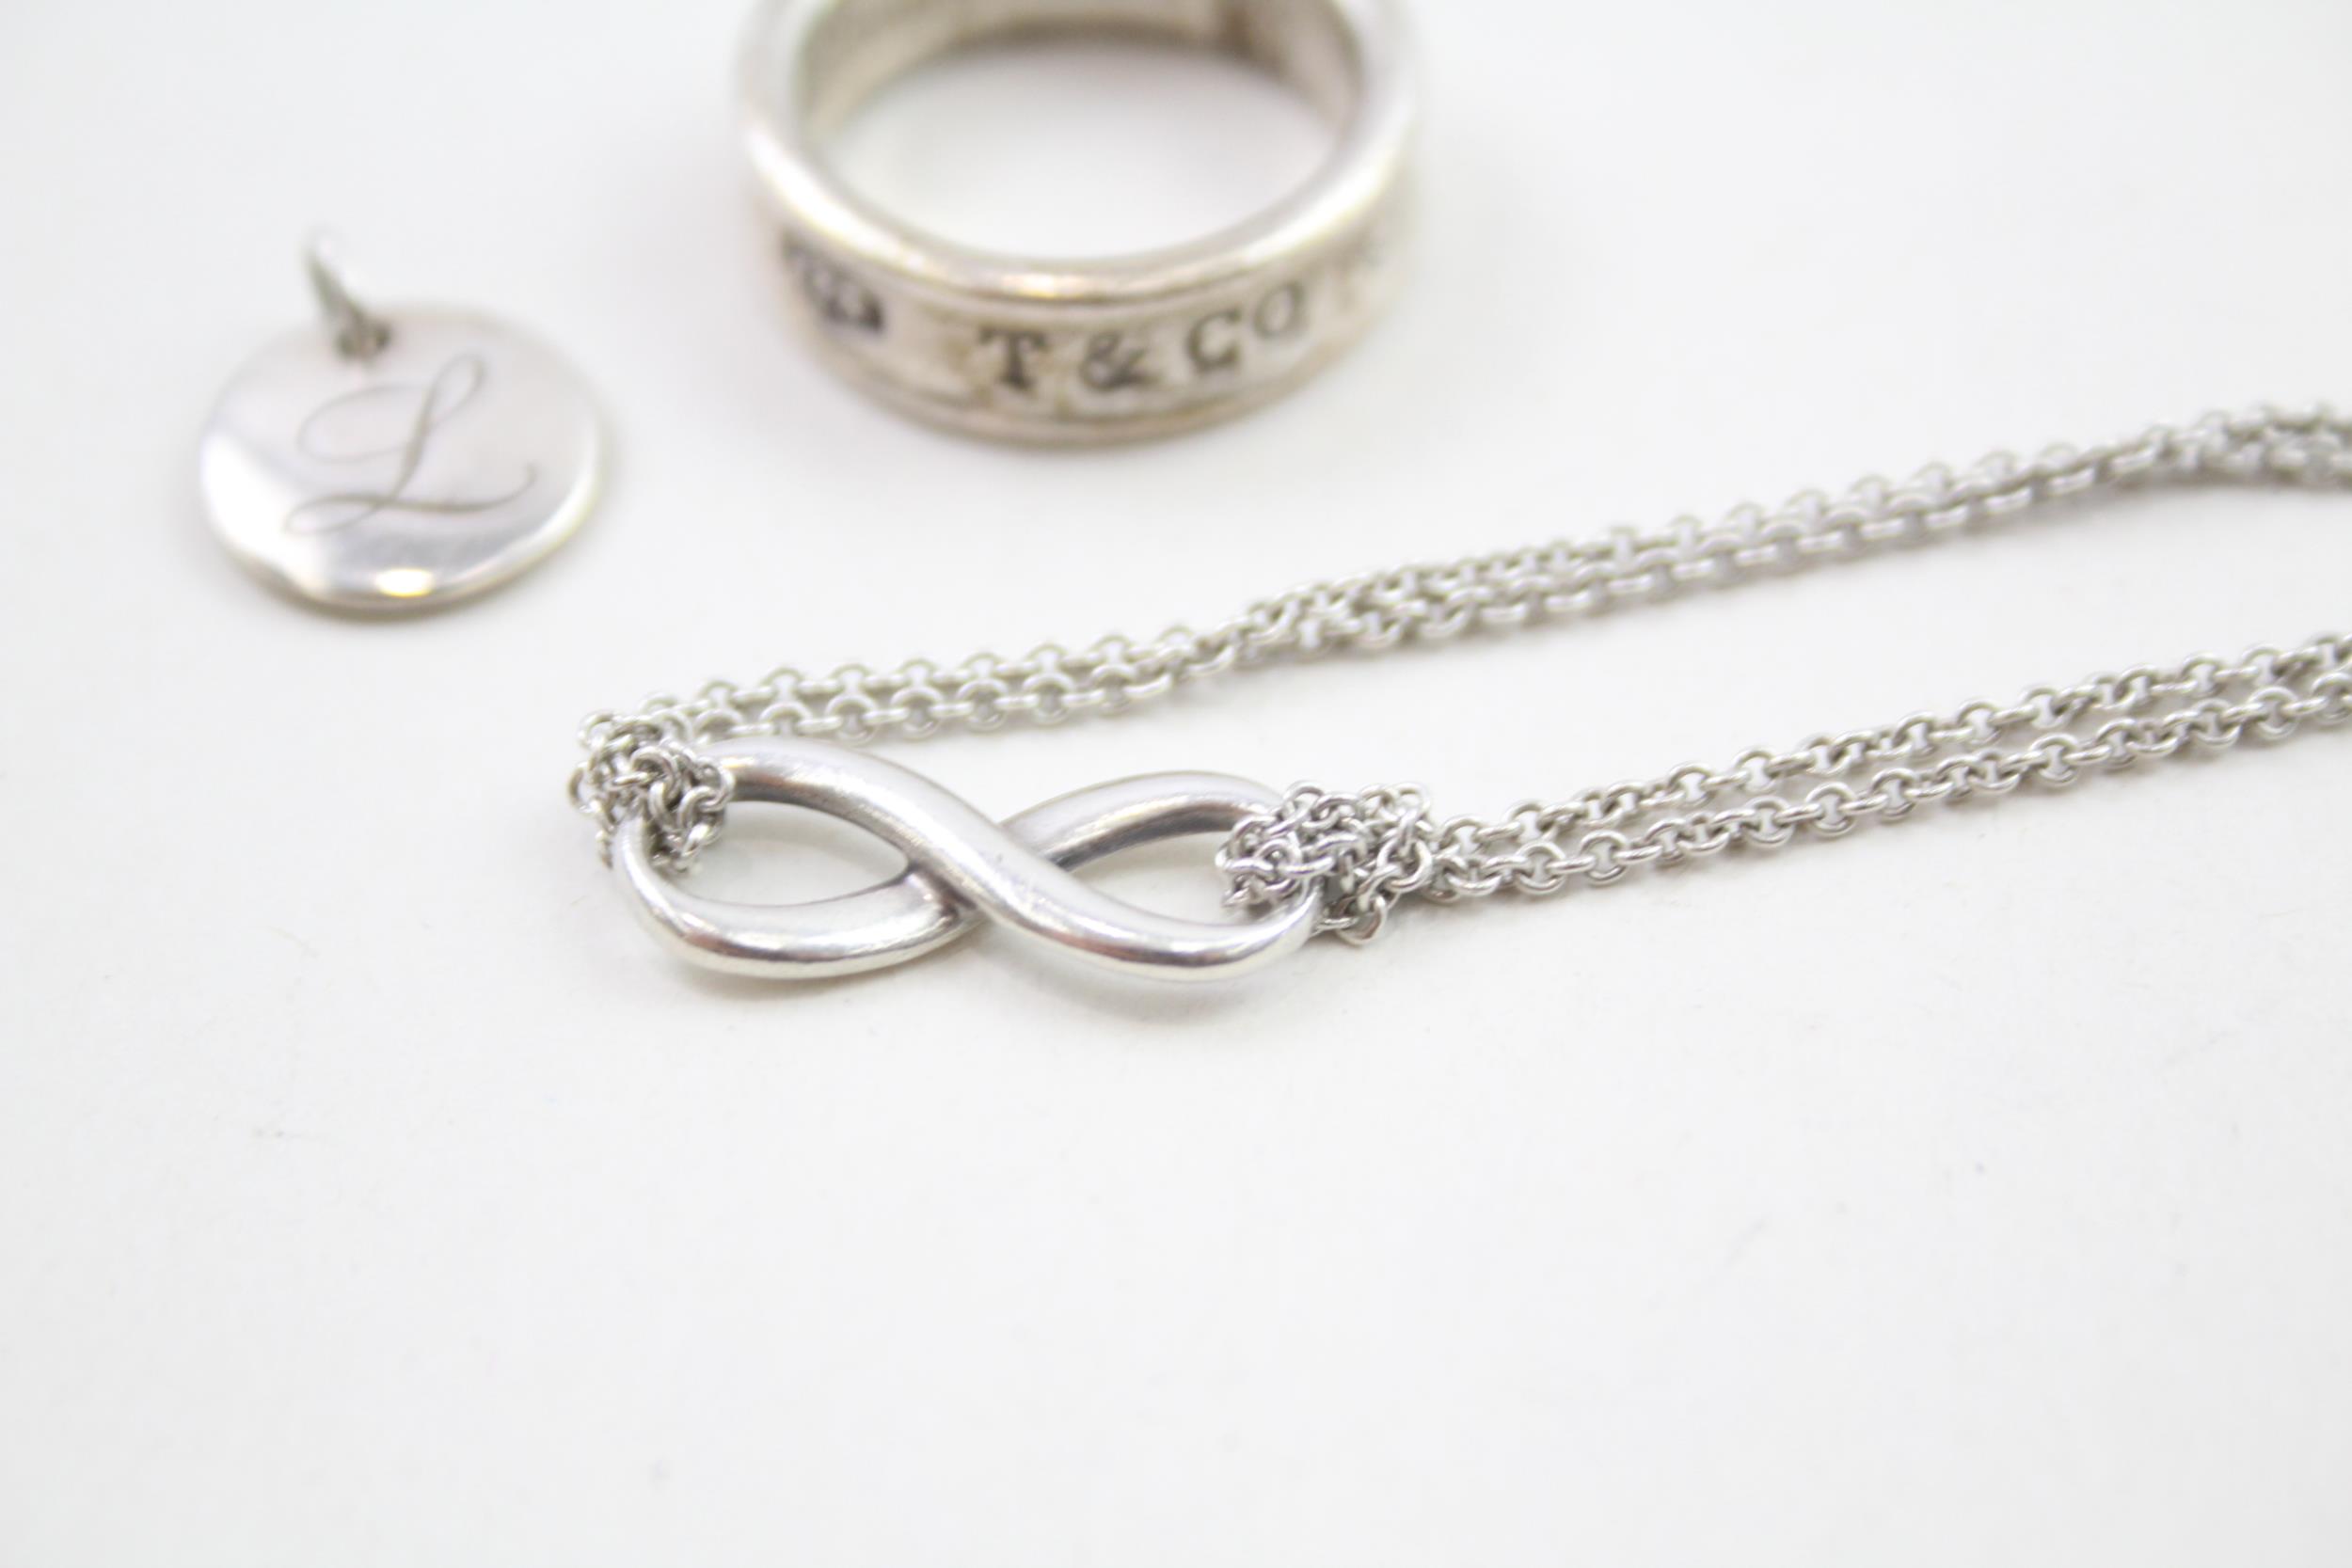 A silver bracelet, ring and pendant by Tiffany and Co (13g) - Image 5 of 6